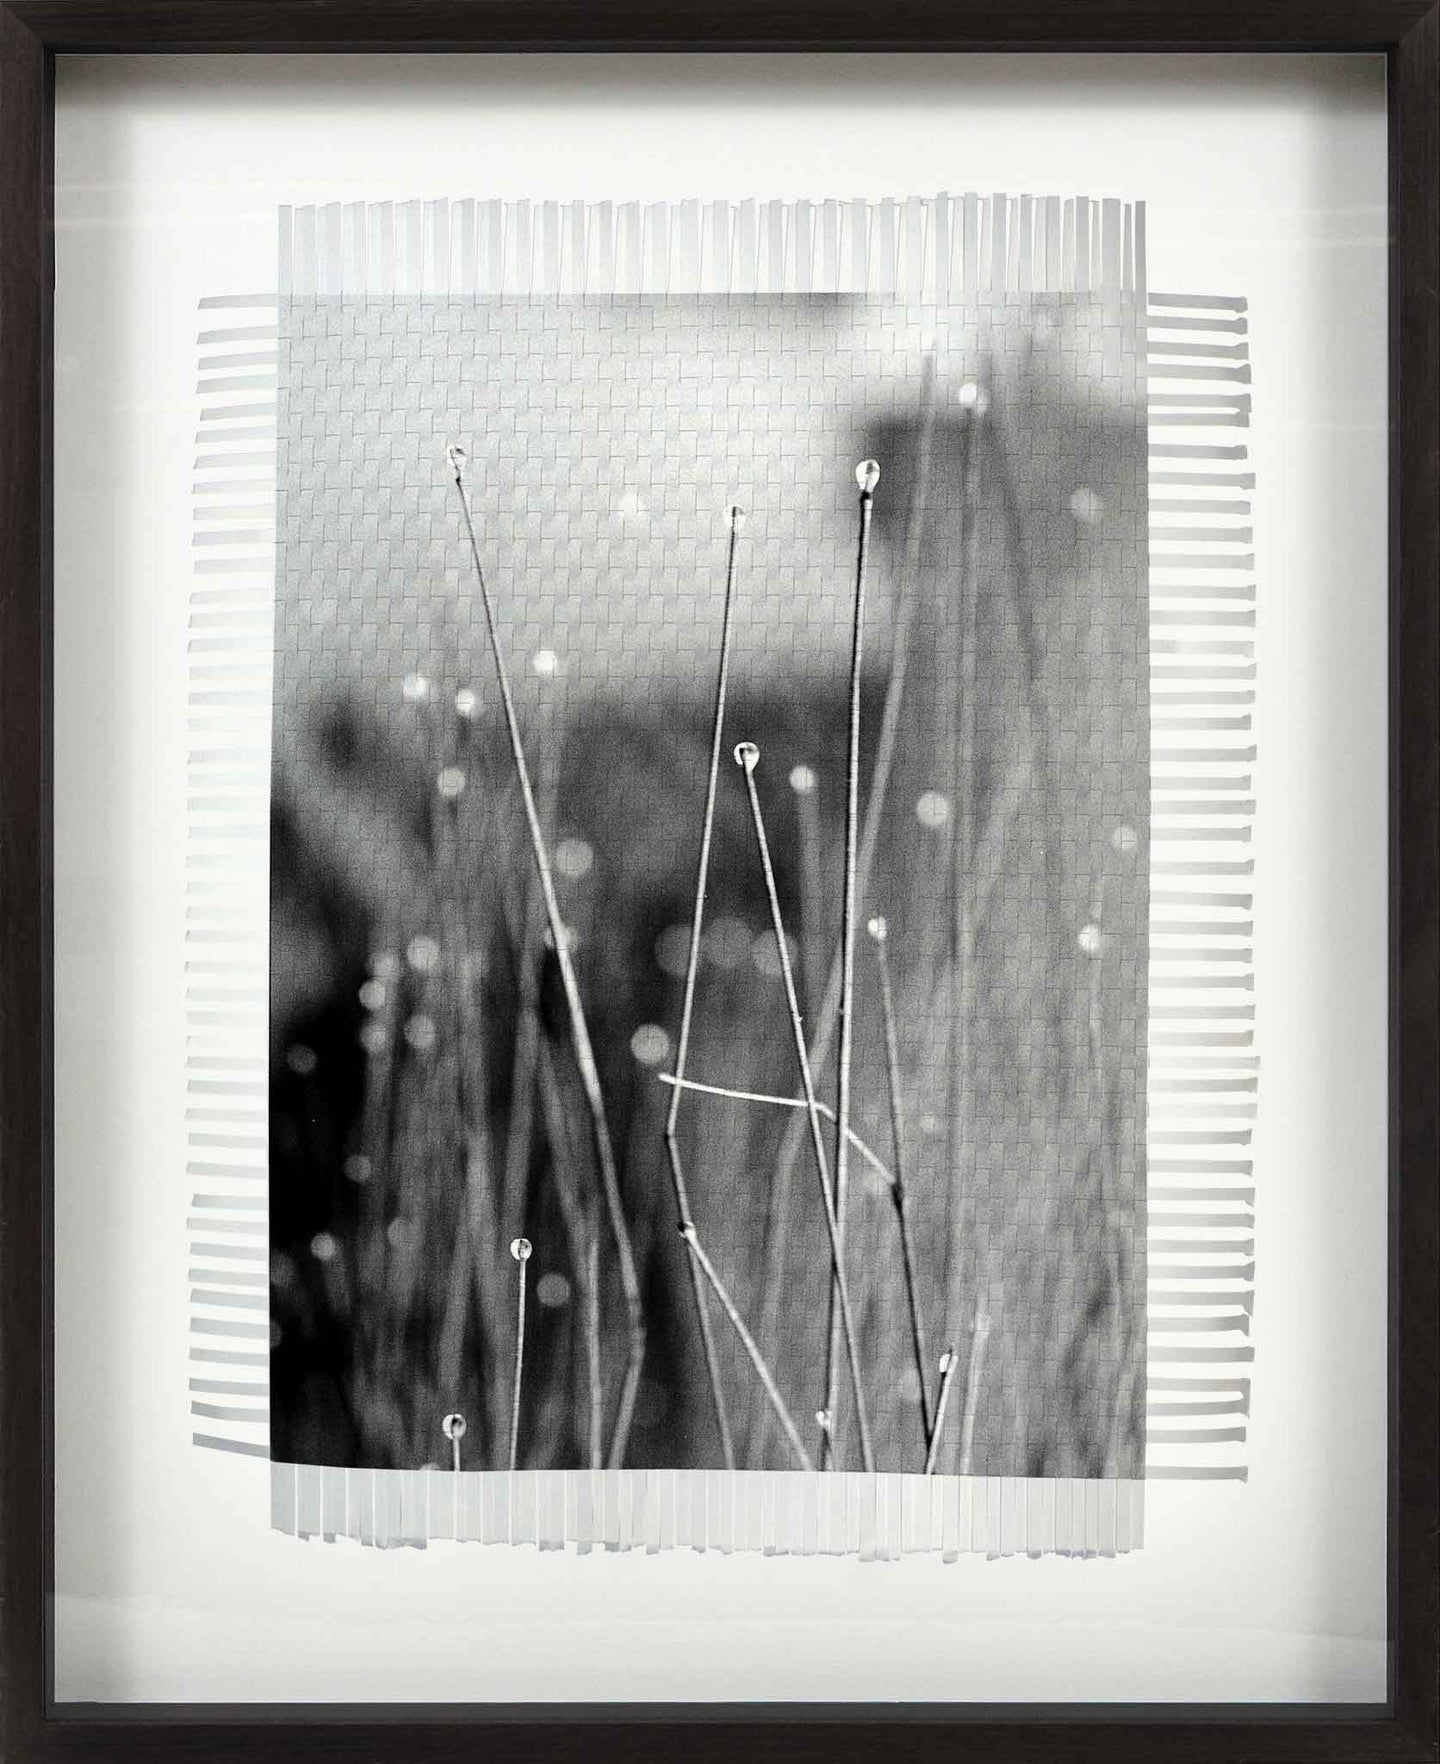 MORNING DEW - HAND WOVEN PHOTOGRAPH